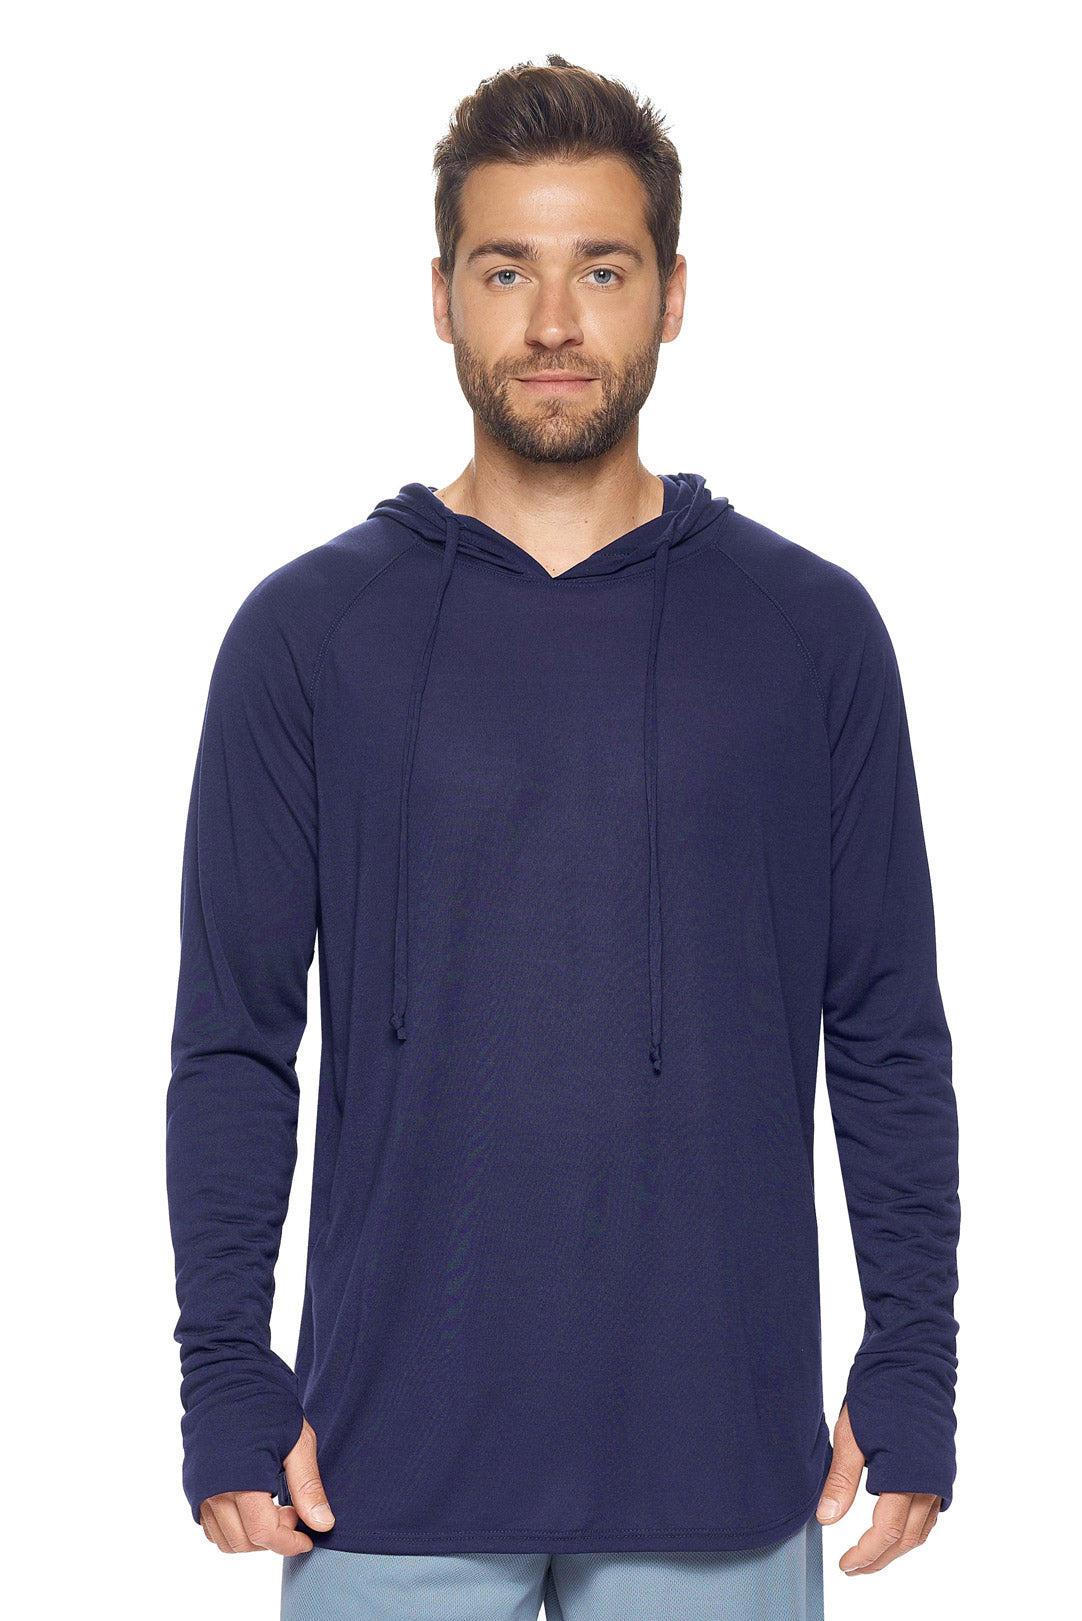 Expert Apparel Men's Hoodie Shirt Siro Soft Performance Active Lifestyle Top Made in USA in Navy#color_navy